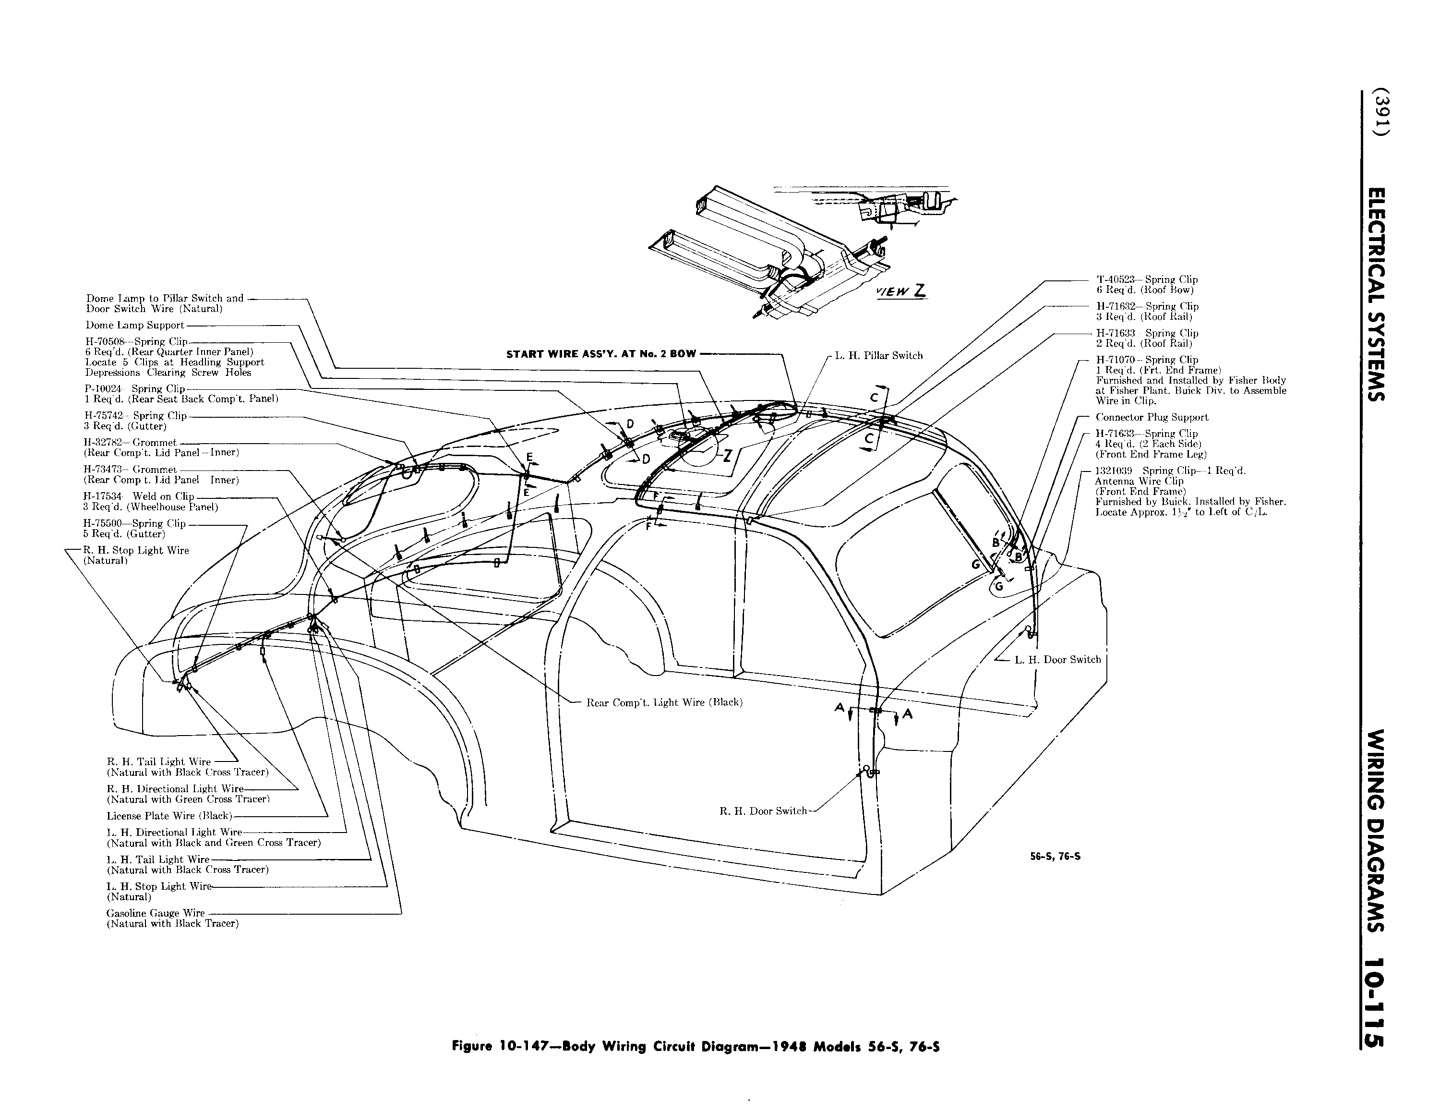 n_11 1948 Buick Shop Manual - Electrical Systems-115-115.jpg